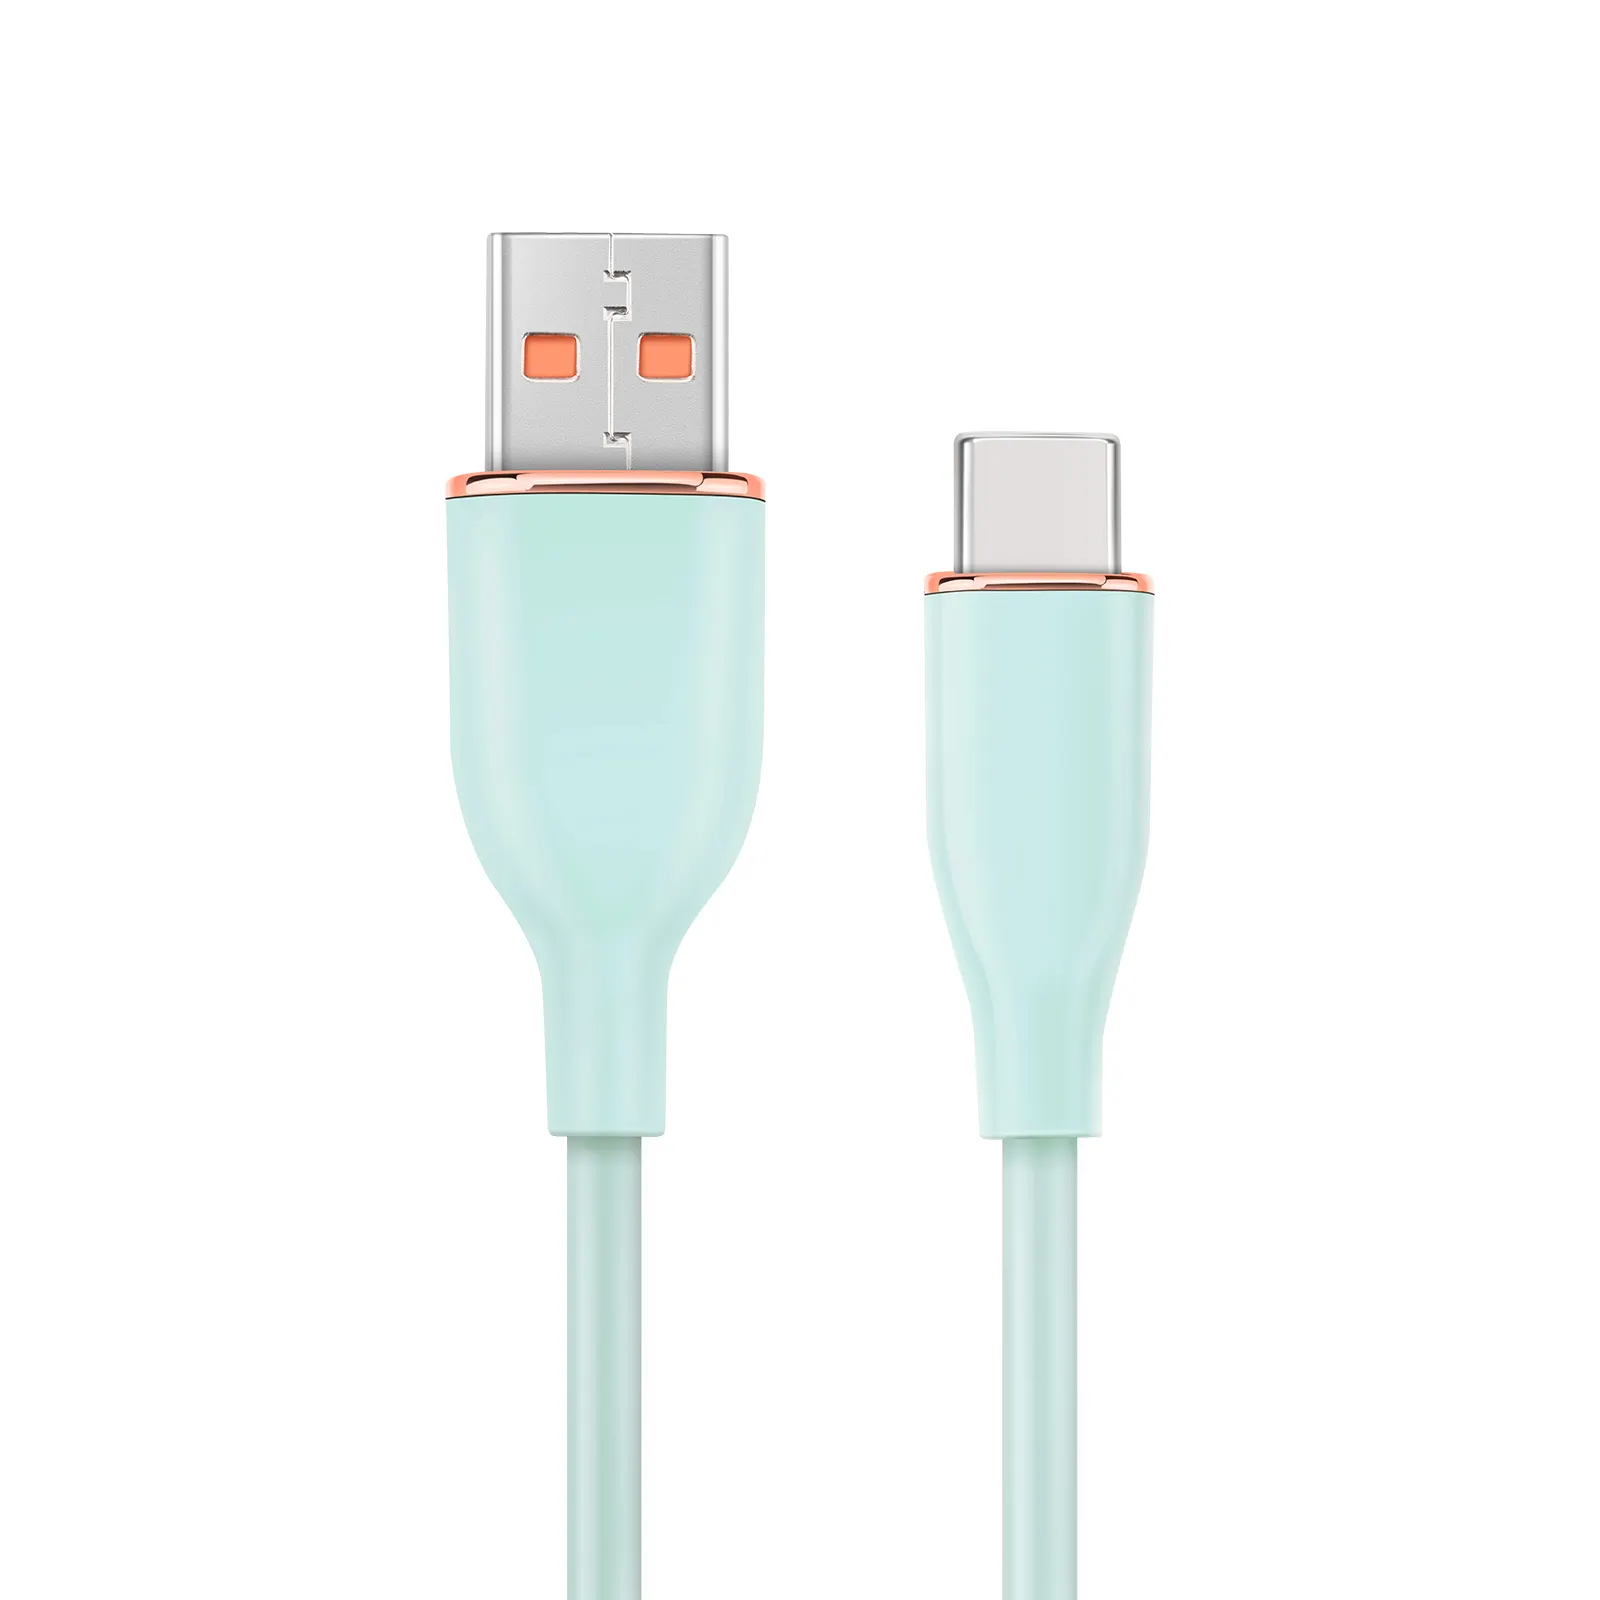 Wistar Silicon Shell Fast Charge&Data Transfer Charge Cables For Smartphone